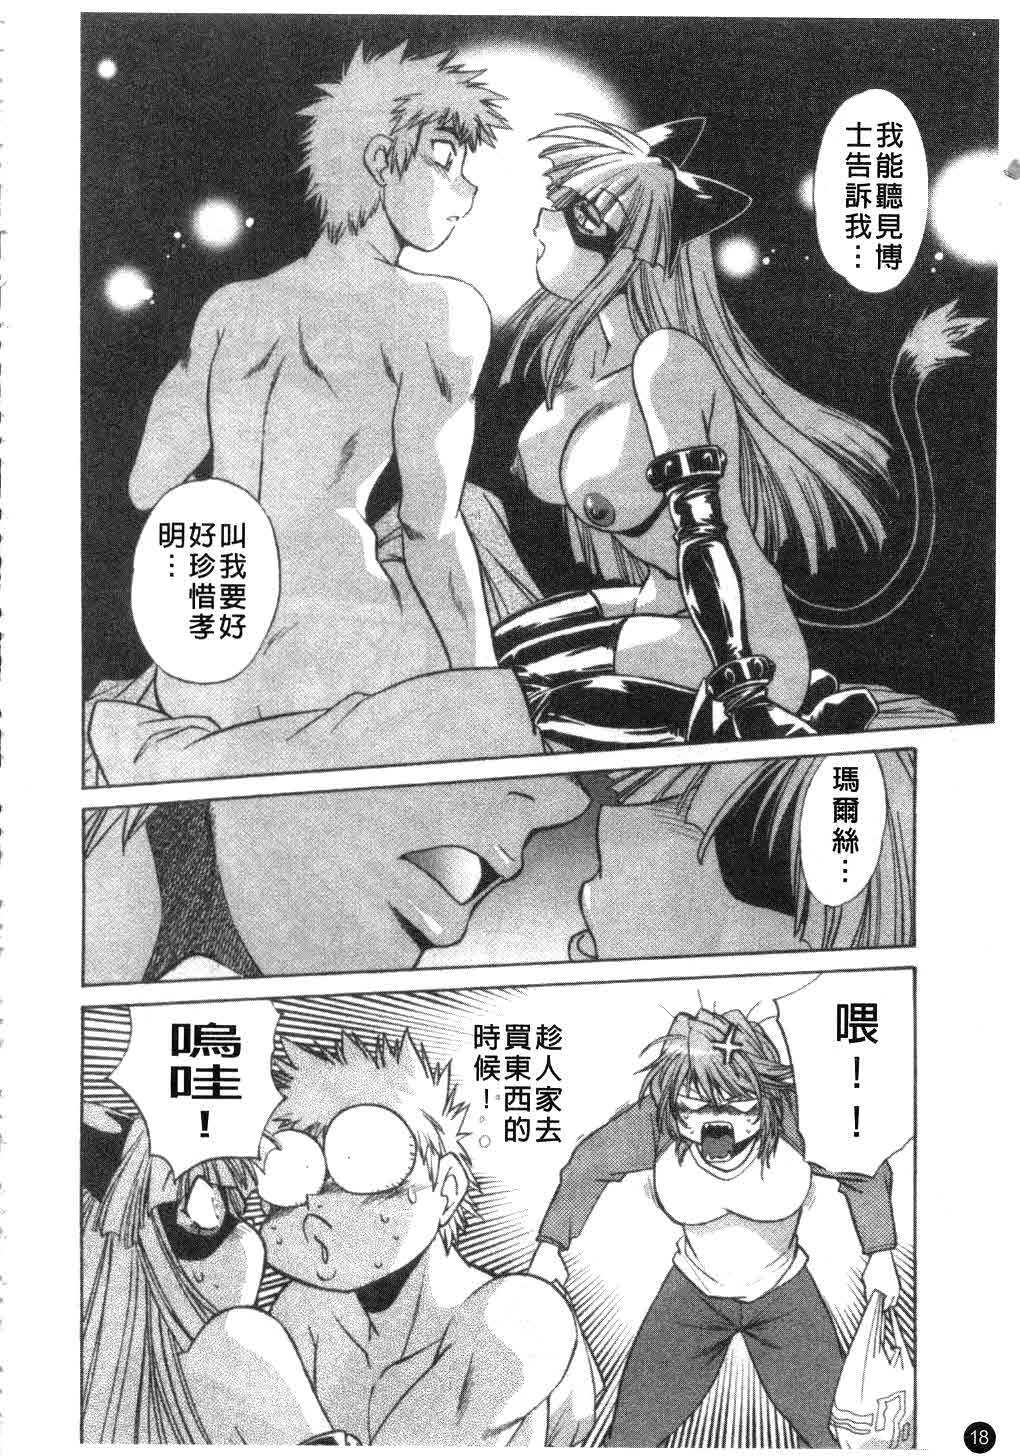 [Manabe Jouji] Tail Chaser 3 | 貓女迷情 3 [Chinese] page 19 full